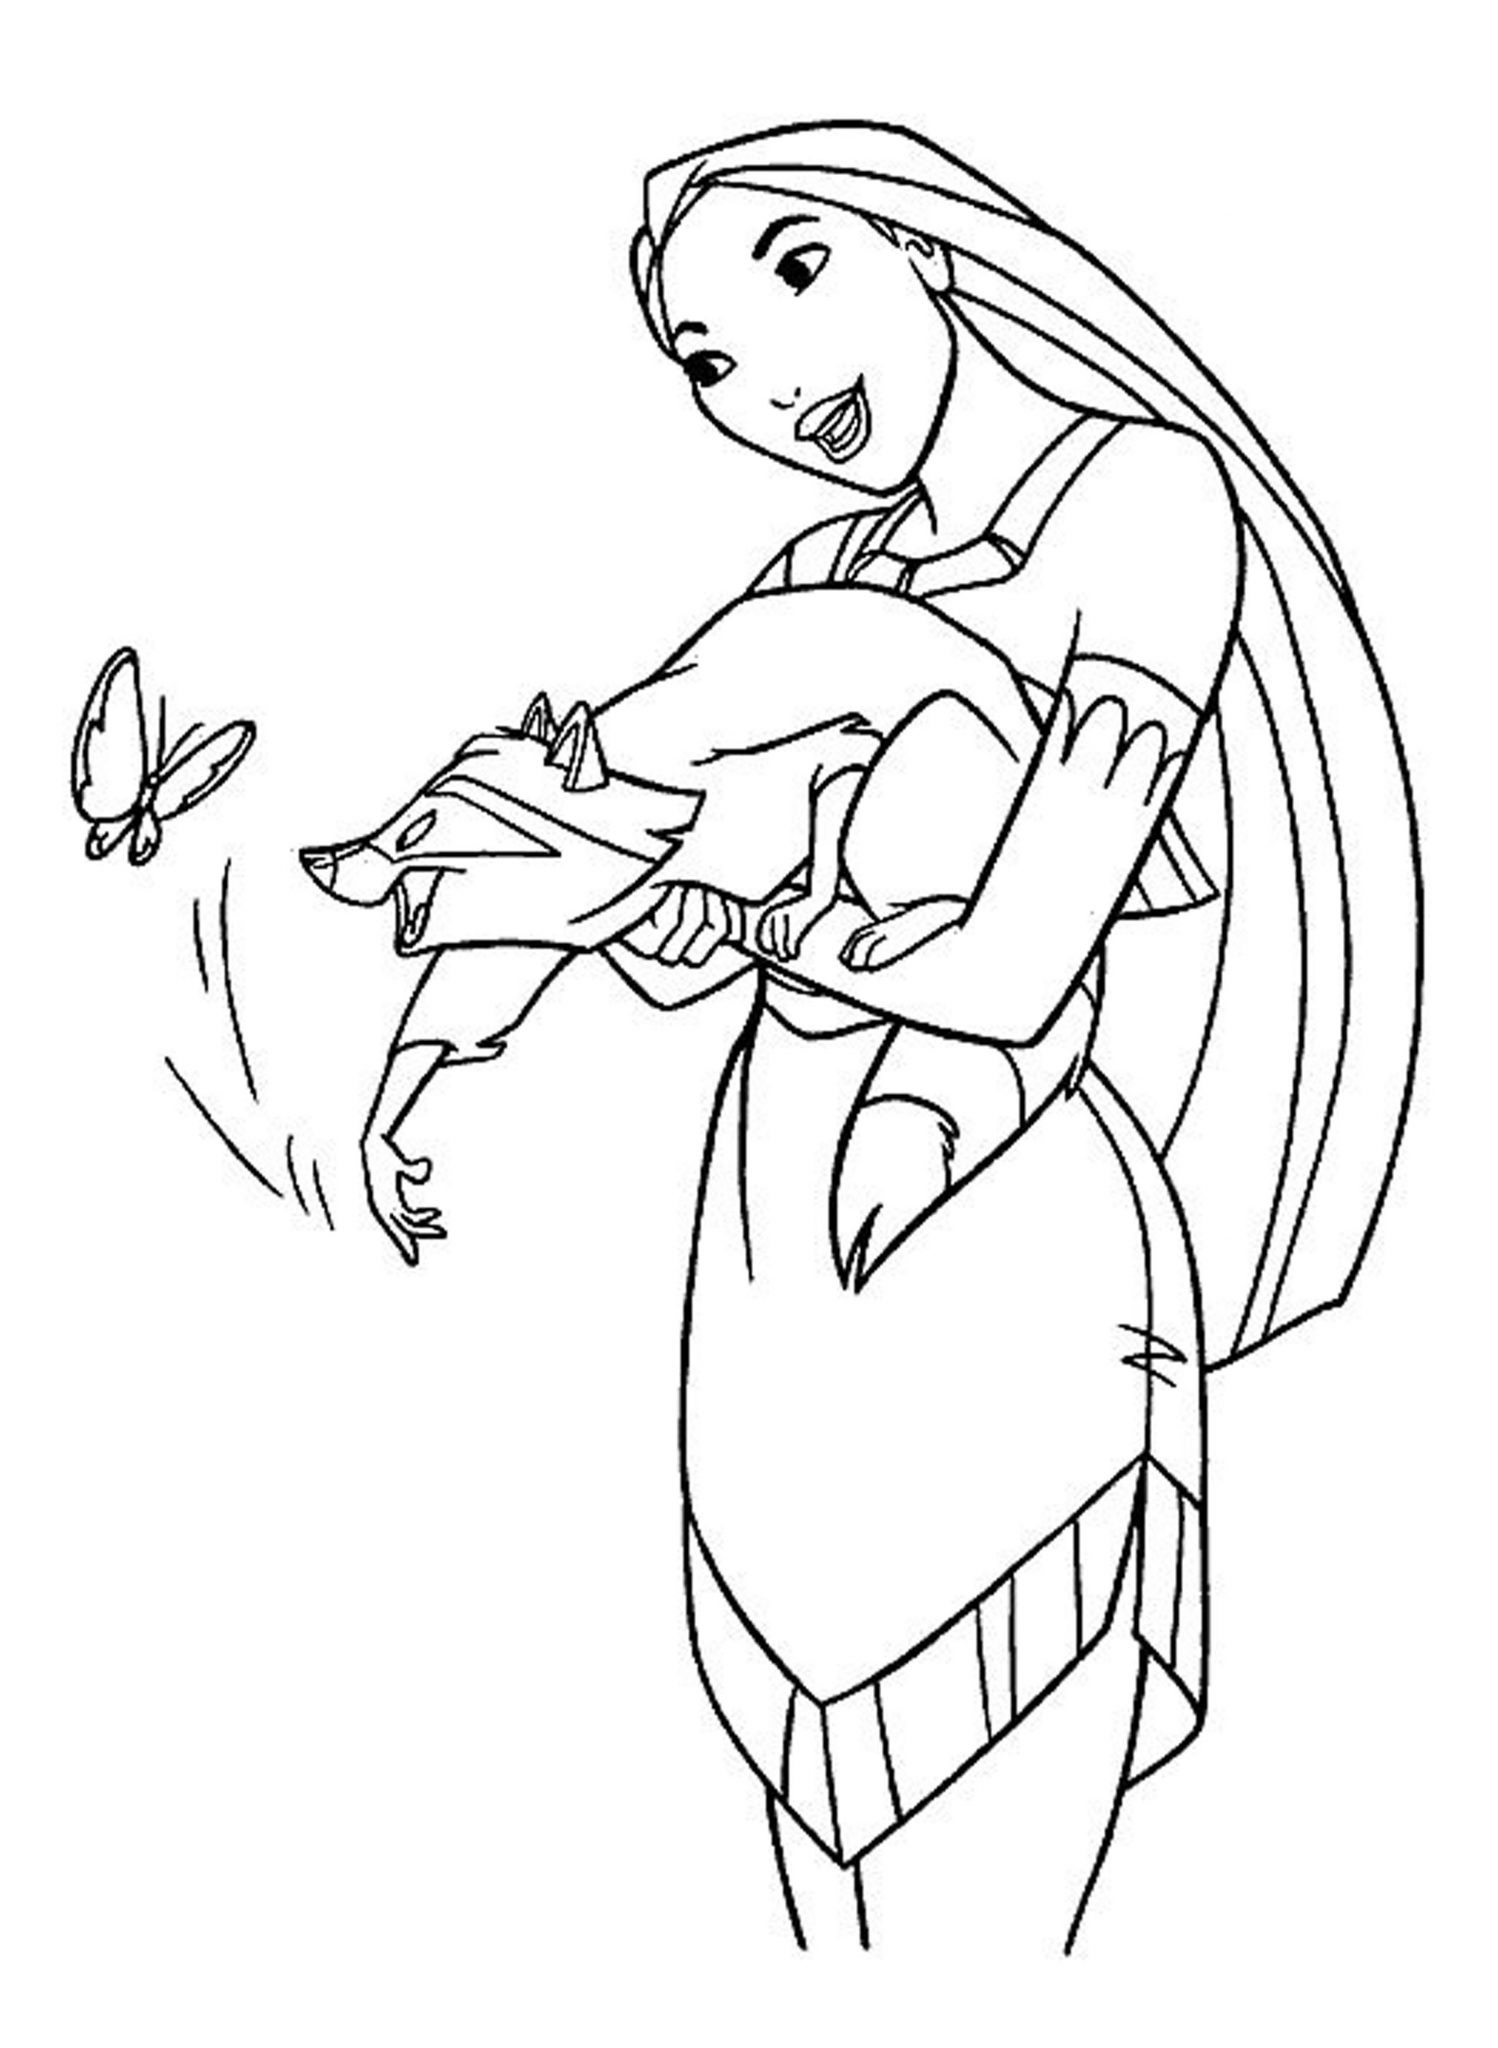 Free Disney Coloring Pages For Kids
 Disney Coloring Pages For Your Children